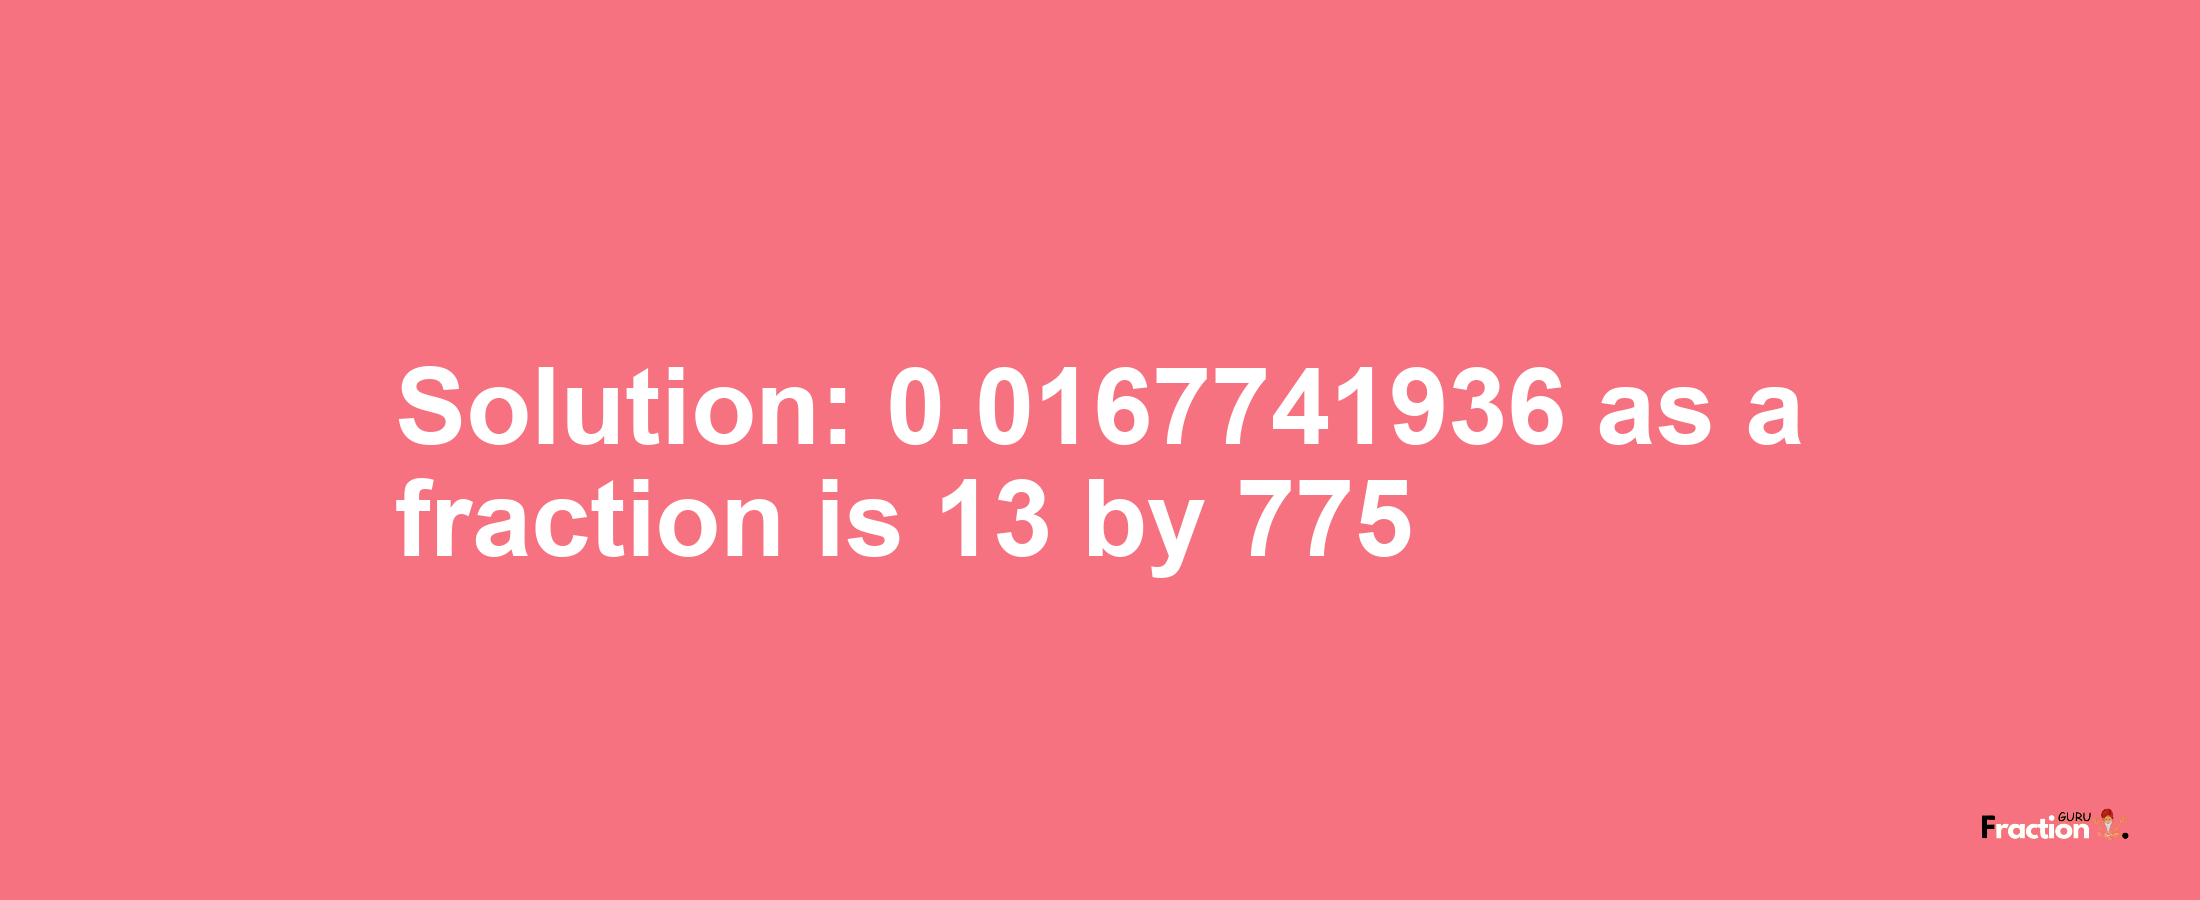 Solution:0.0167741936 as a fraction is 13/775